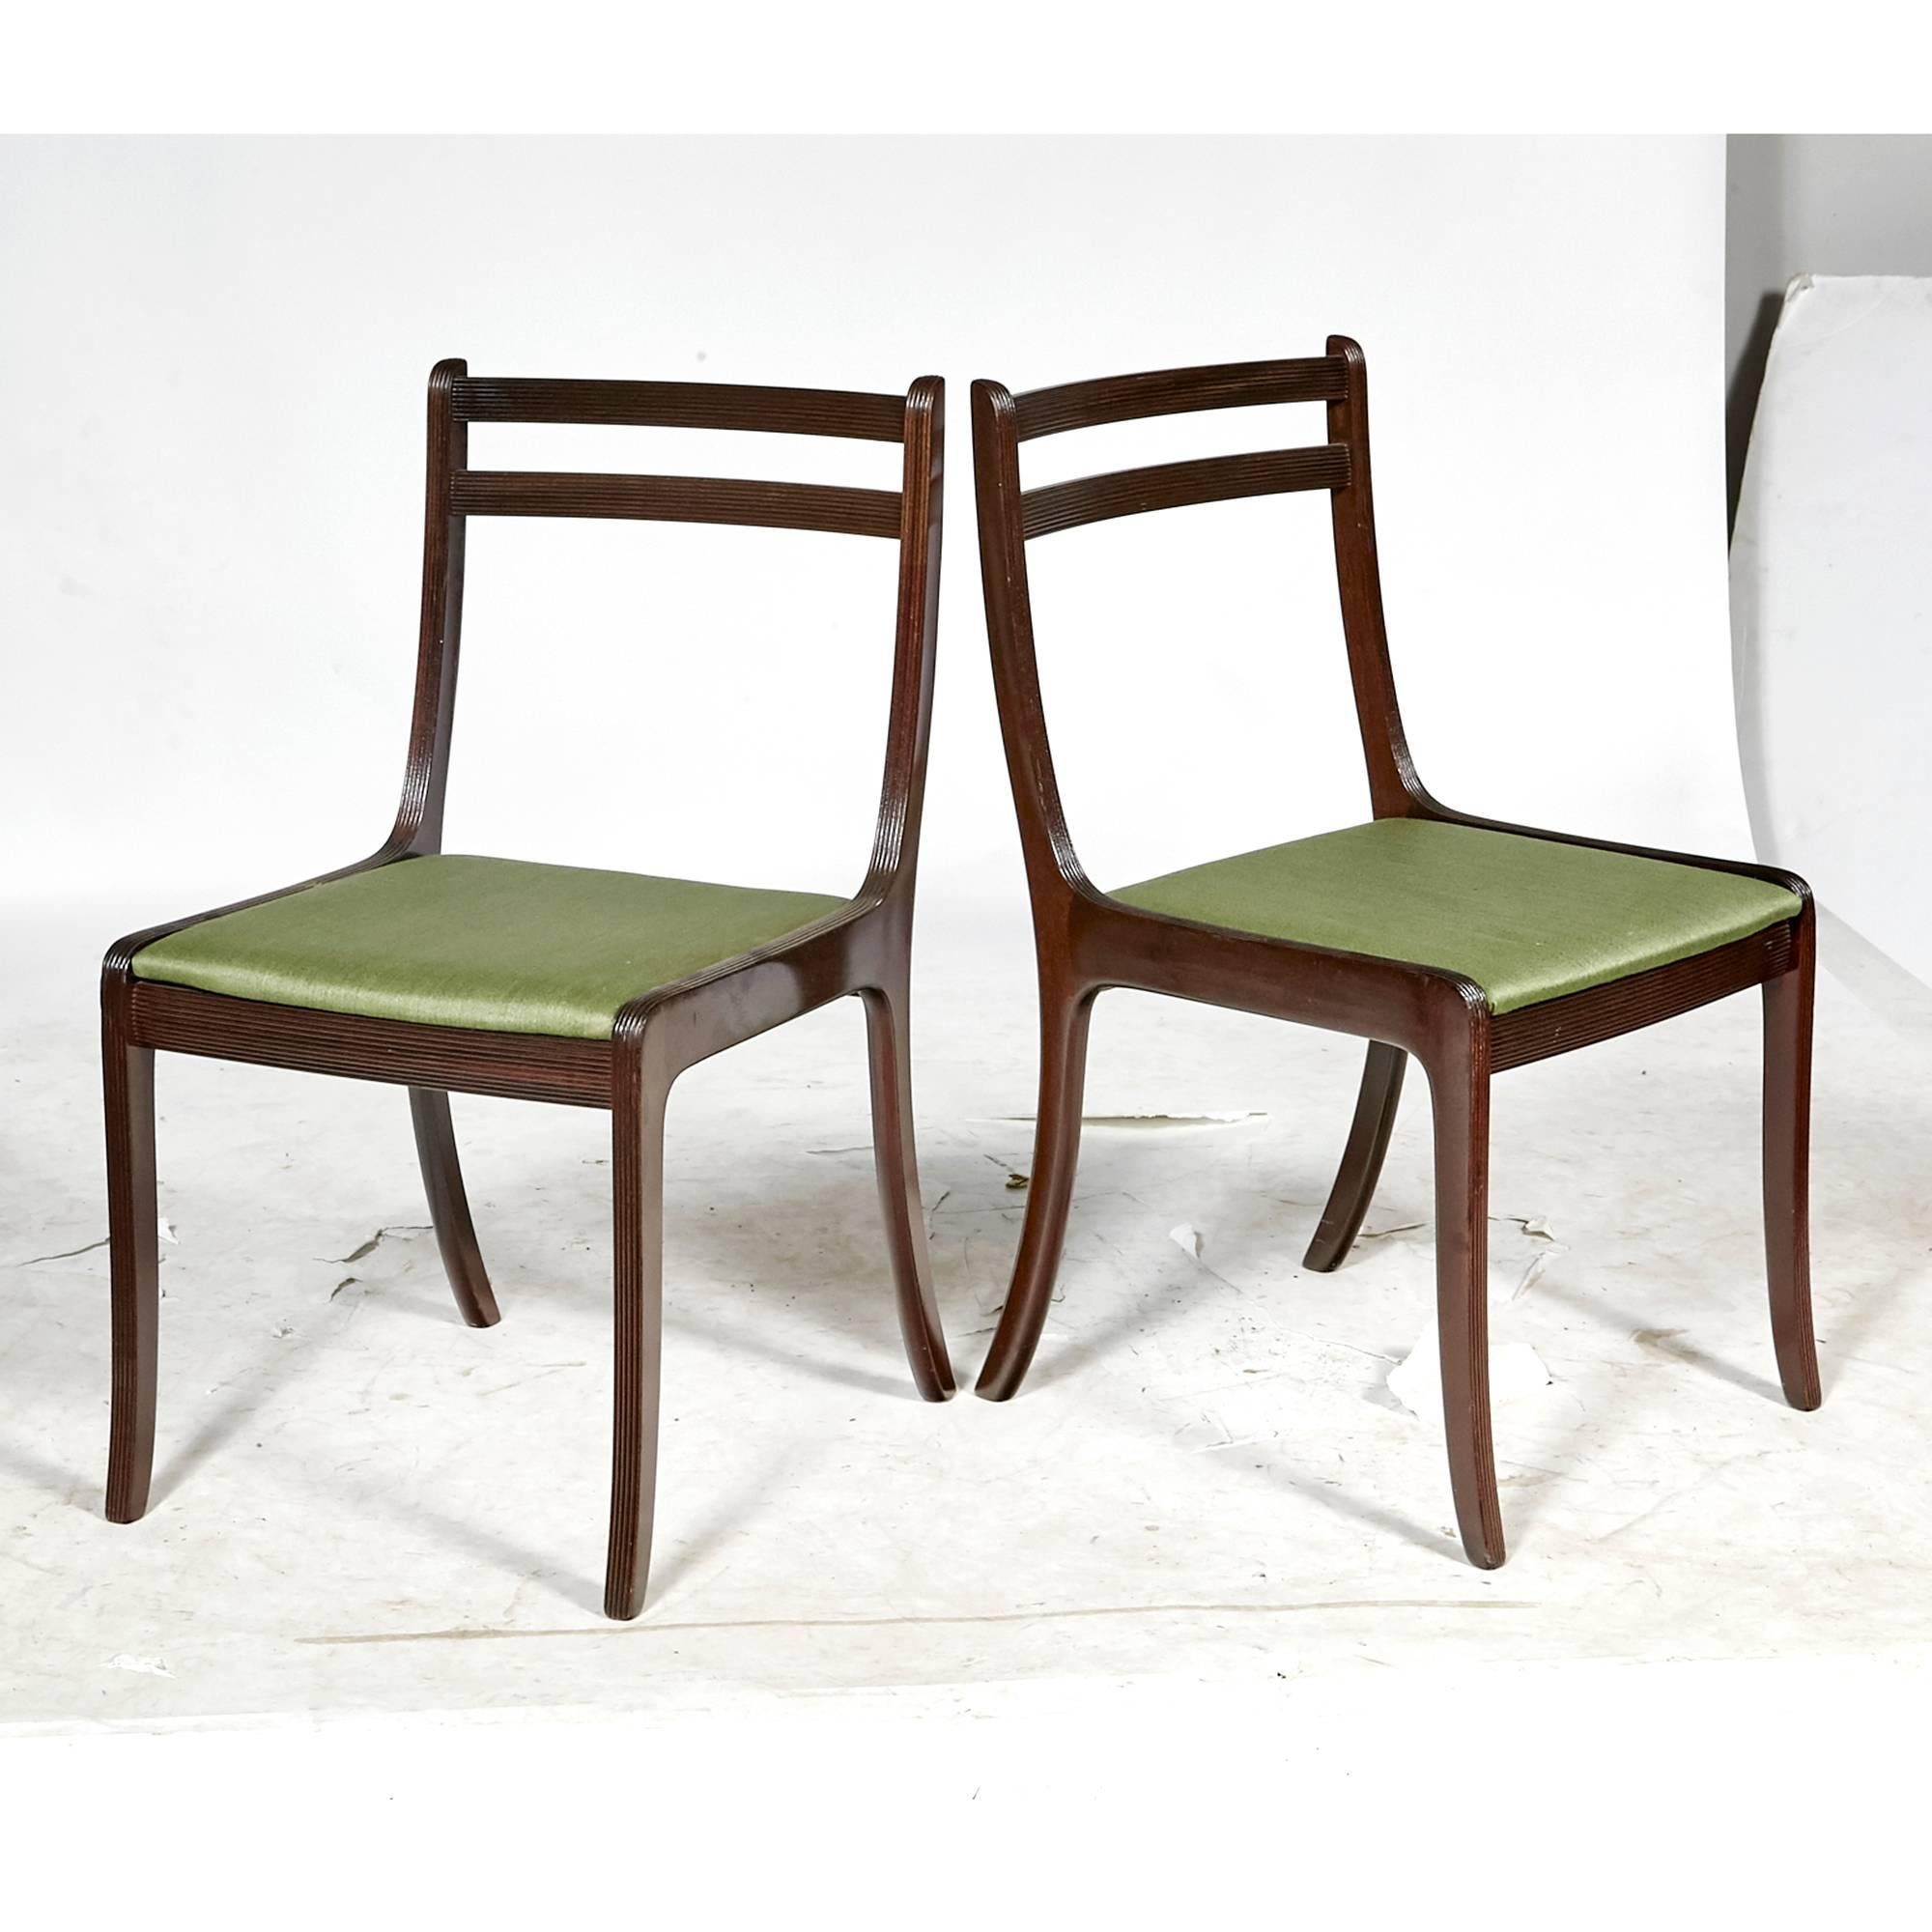 Vintage Scandinavian Modern mahogany wood set of six dining chairs by Ole Wanscher for Poul Jeppesen (PJ) of Denmark, circa 1960s. New green fabric on the seats. Marked underneath.